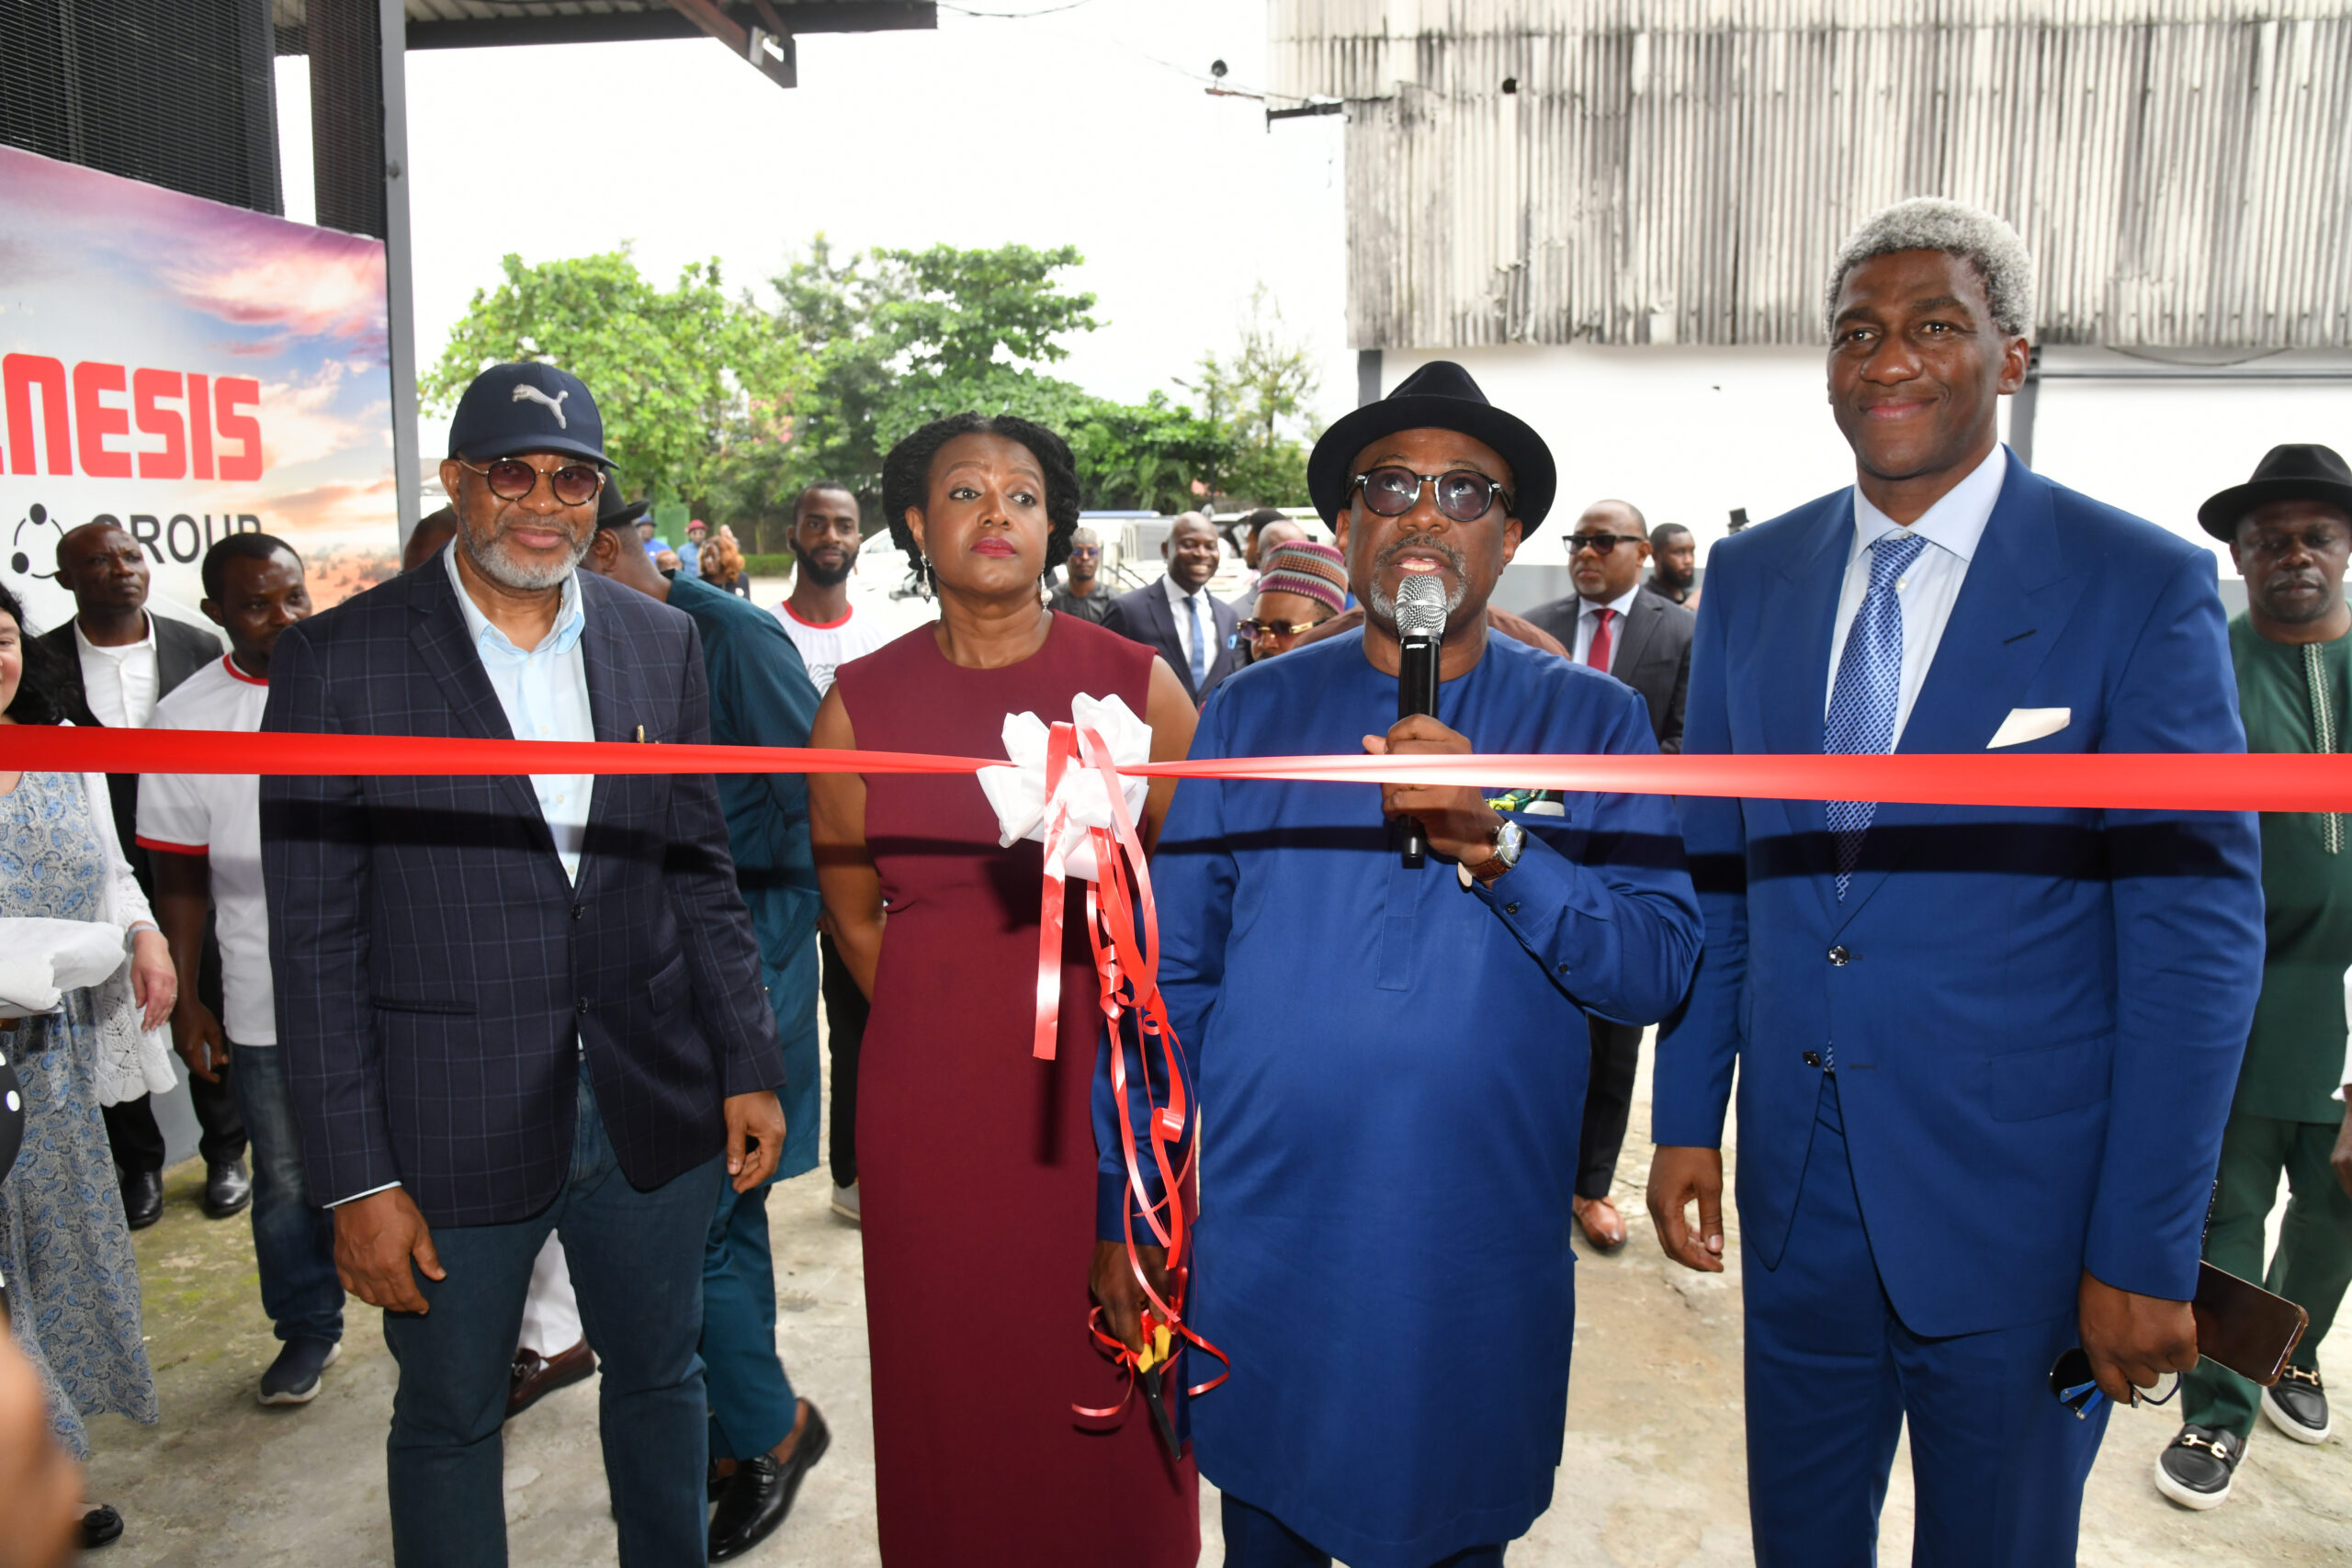 The Executive Secretary, Nigerian Content Development and Monitoring Board, Engr. Simbi Kesiye Wabote with the Group Managing Director of Genesis, Ichie Dr. Nnaeto Orazulike, and his wife, commissioning the Corporate Head Office and Training Academy of Genesis Group in Port Harcourt, Rivers State on Thursday.